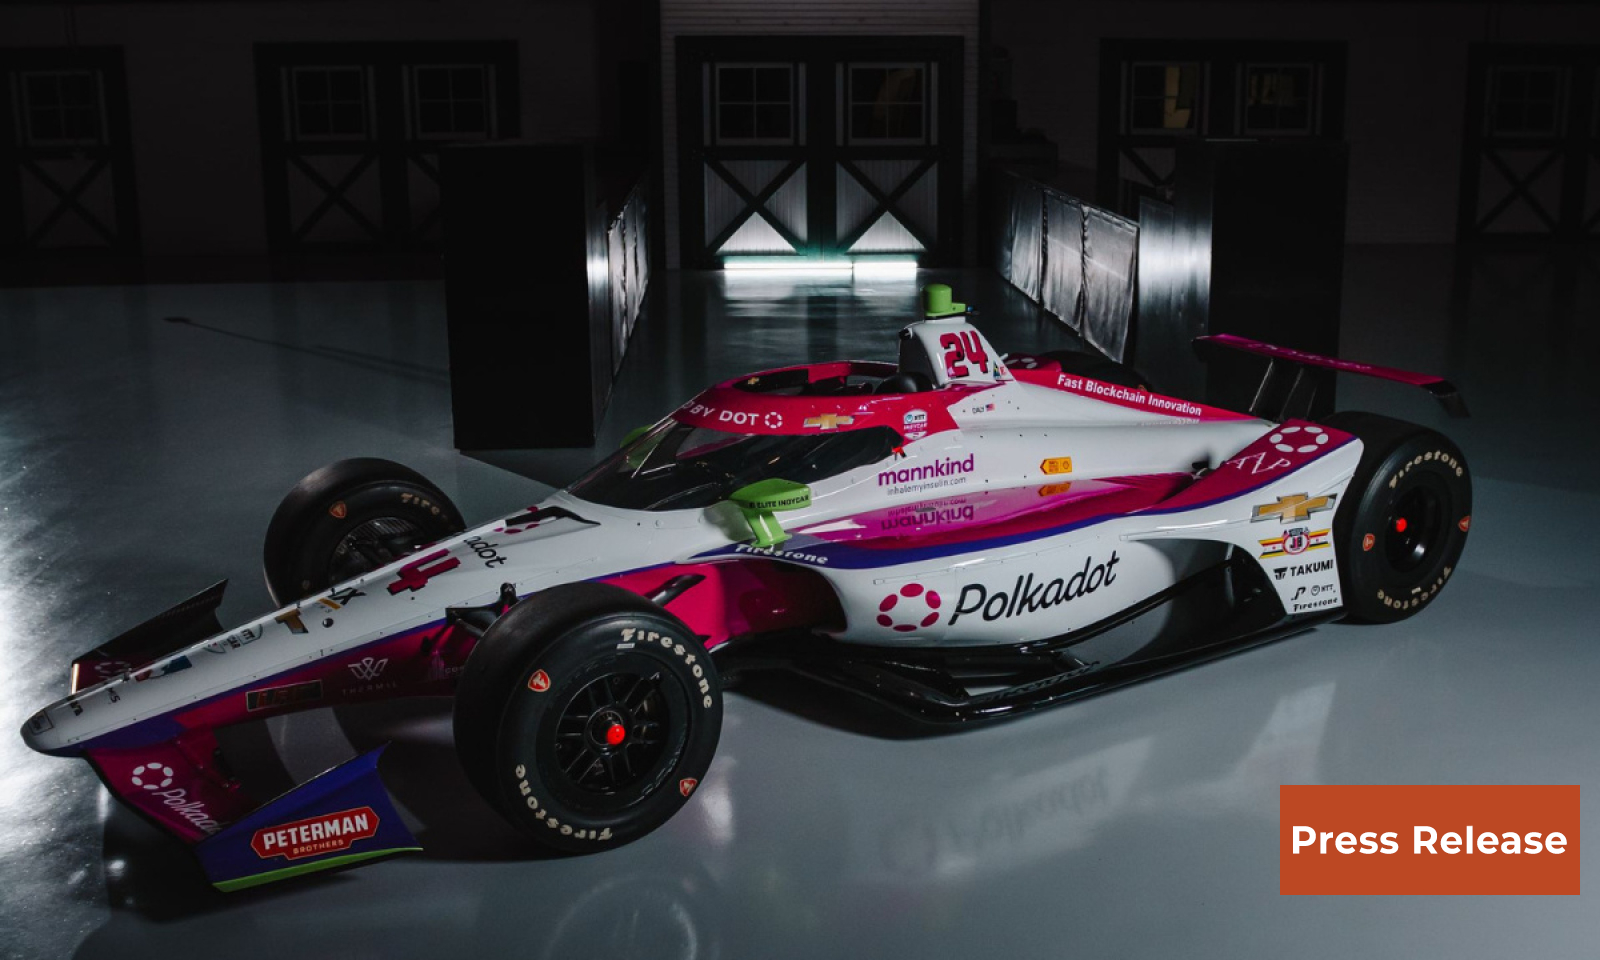 Polkadot’s Community-Driven Indy 500 Sponsorship of Conor Daly a First in Sports History